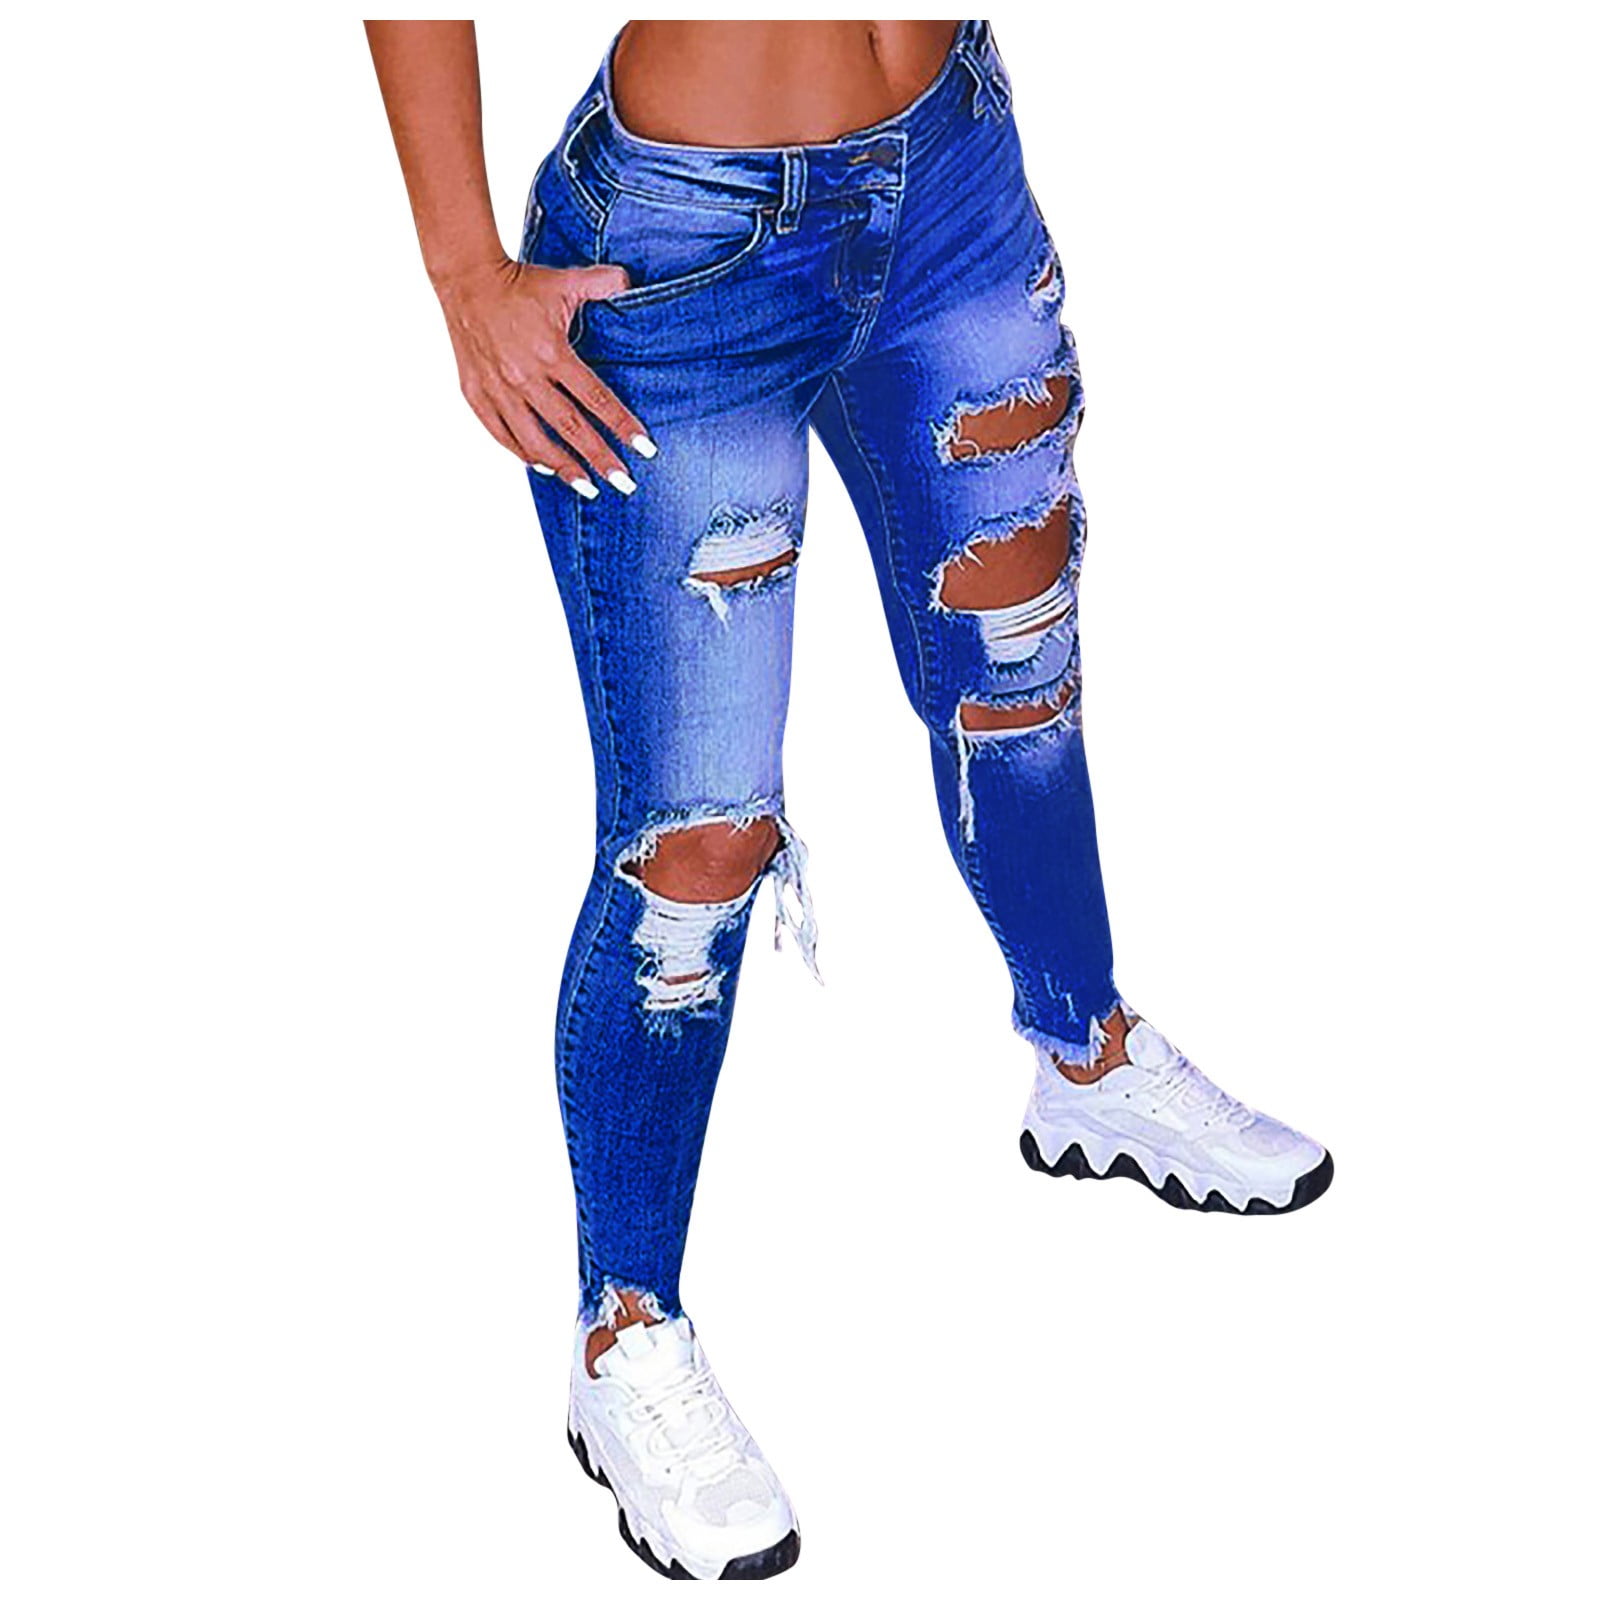 Bigersell Women's Jean Leggings Full Length Pants Jeans Women Solid Color  Blue Hole High Jeans Flares Ankle Fashion Pants Trouser Loose Fit Jeans for